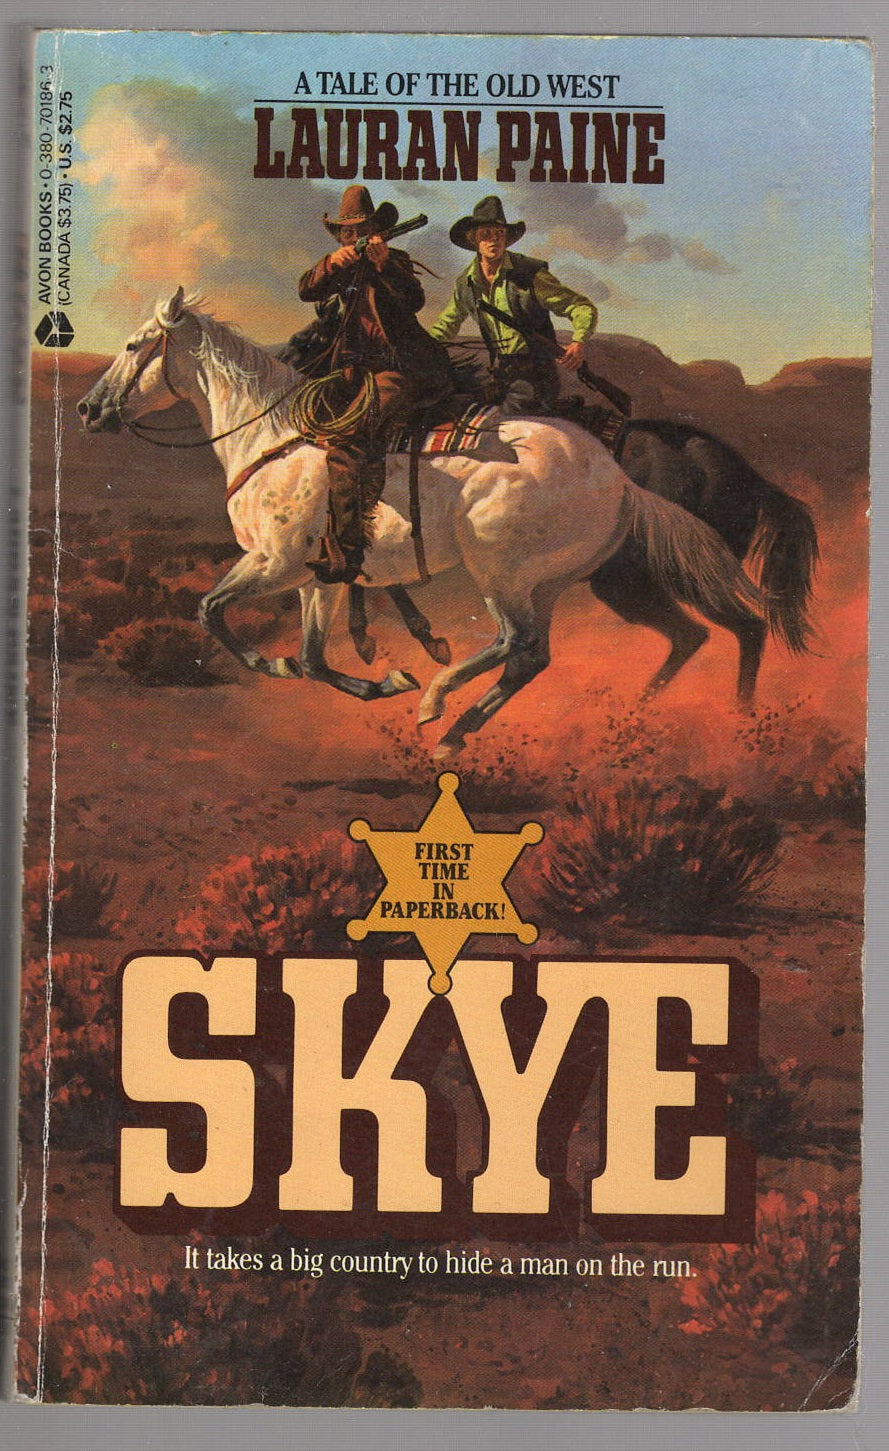 Skye Action historical fiction Western Books